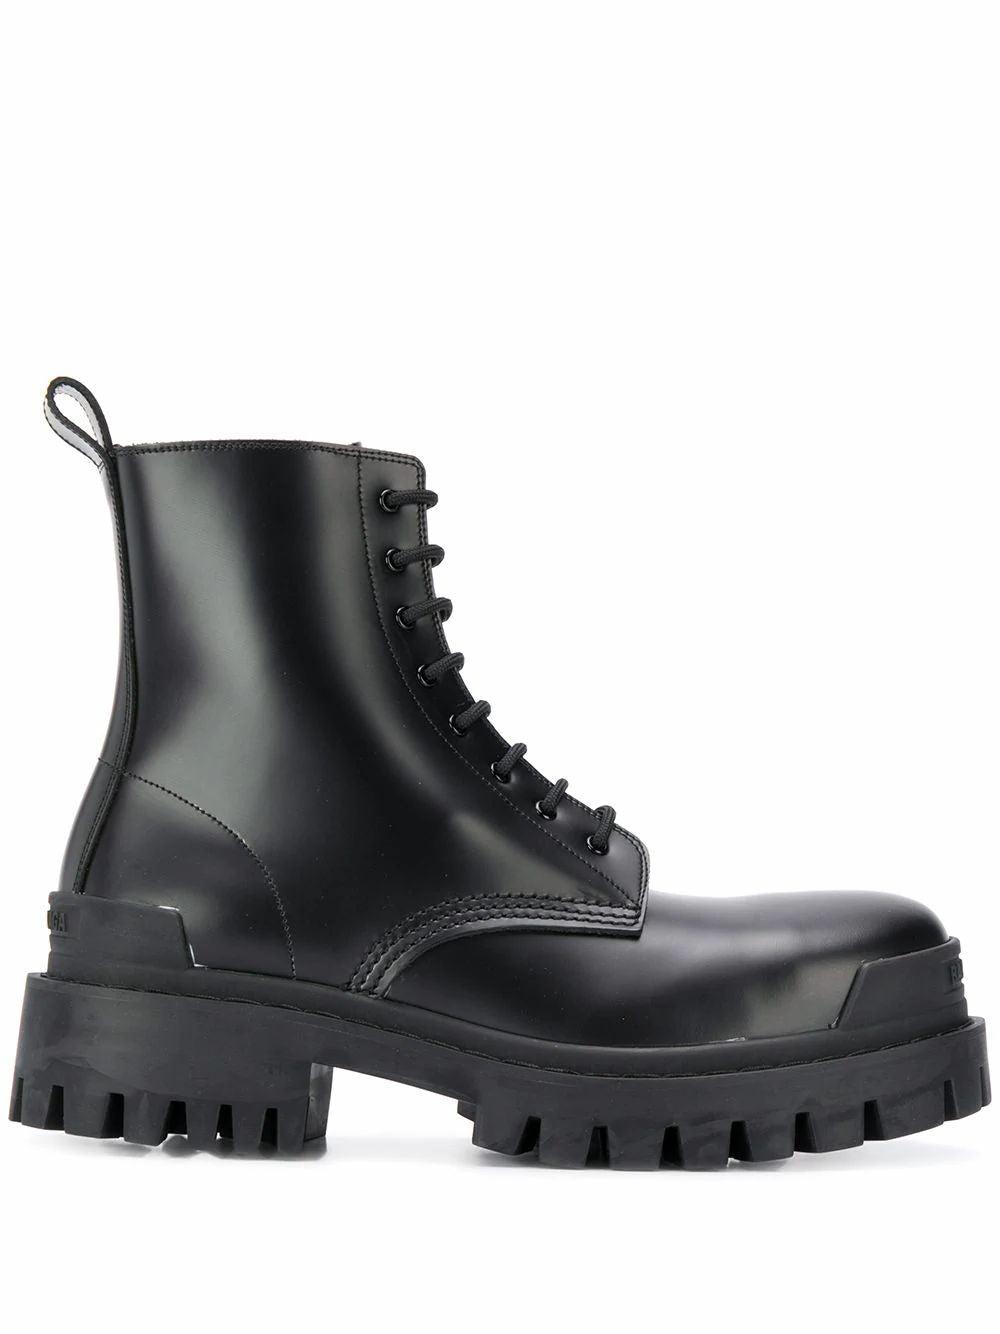 Balenciaga Leather Military-style Ankle Boots in Black - Save 35% - Lyst